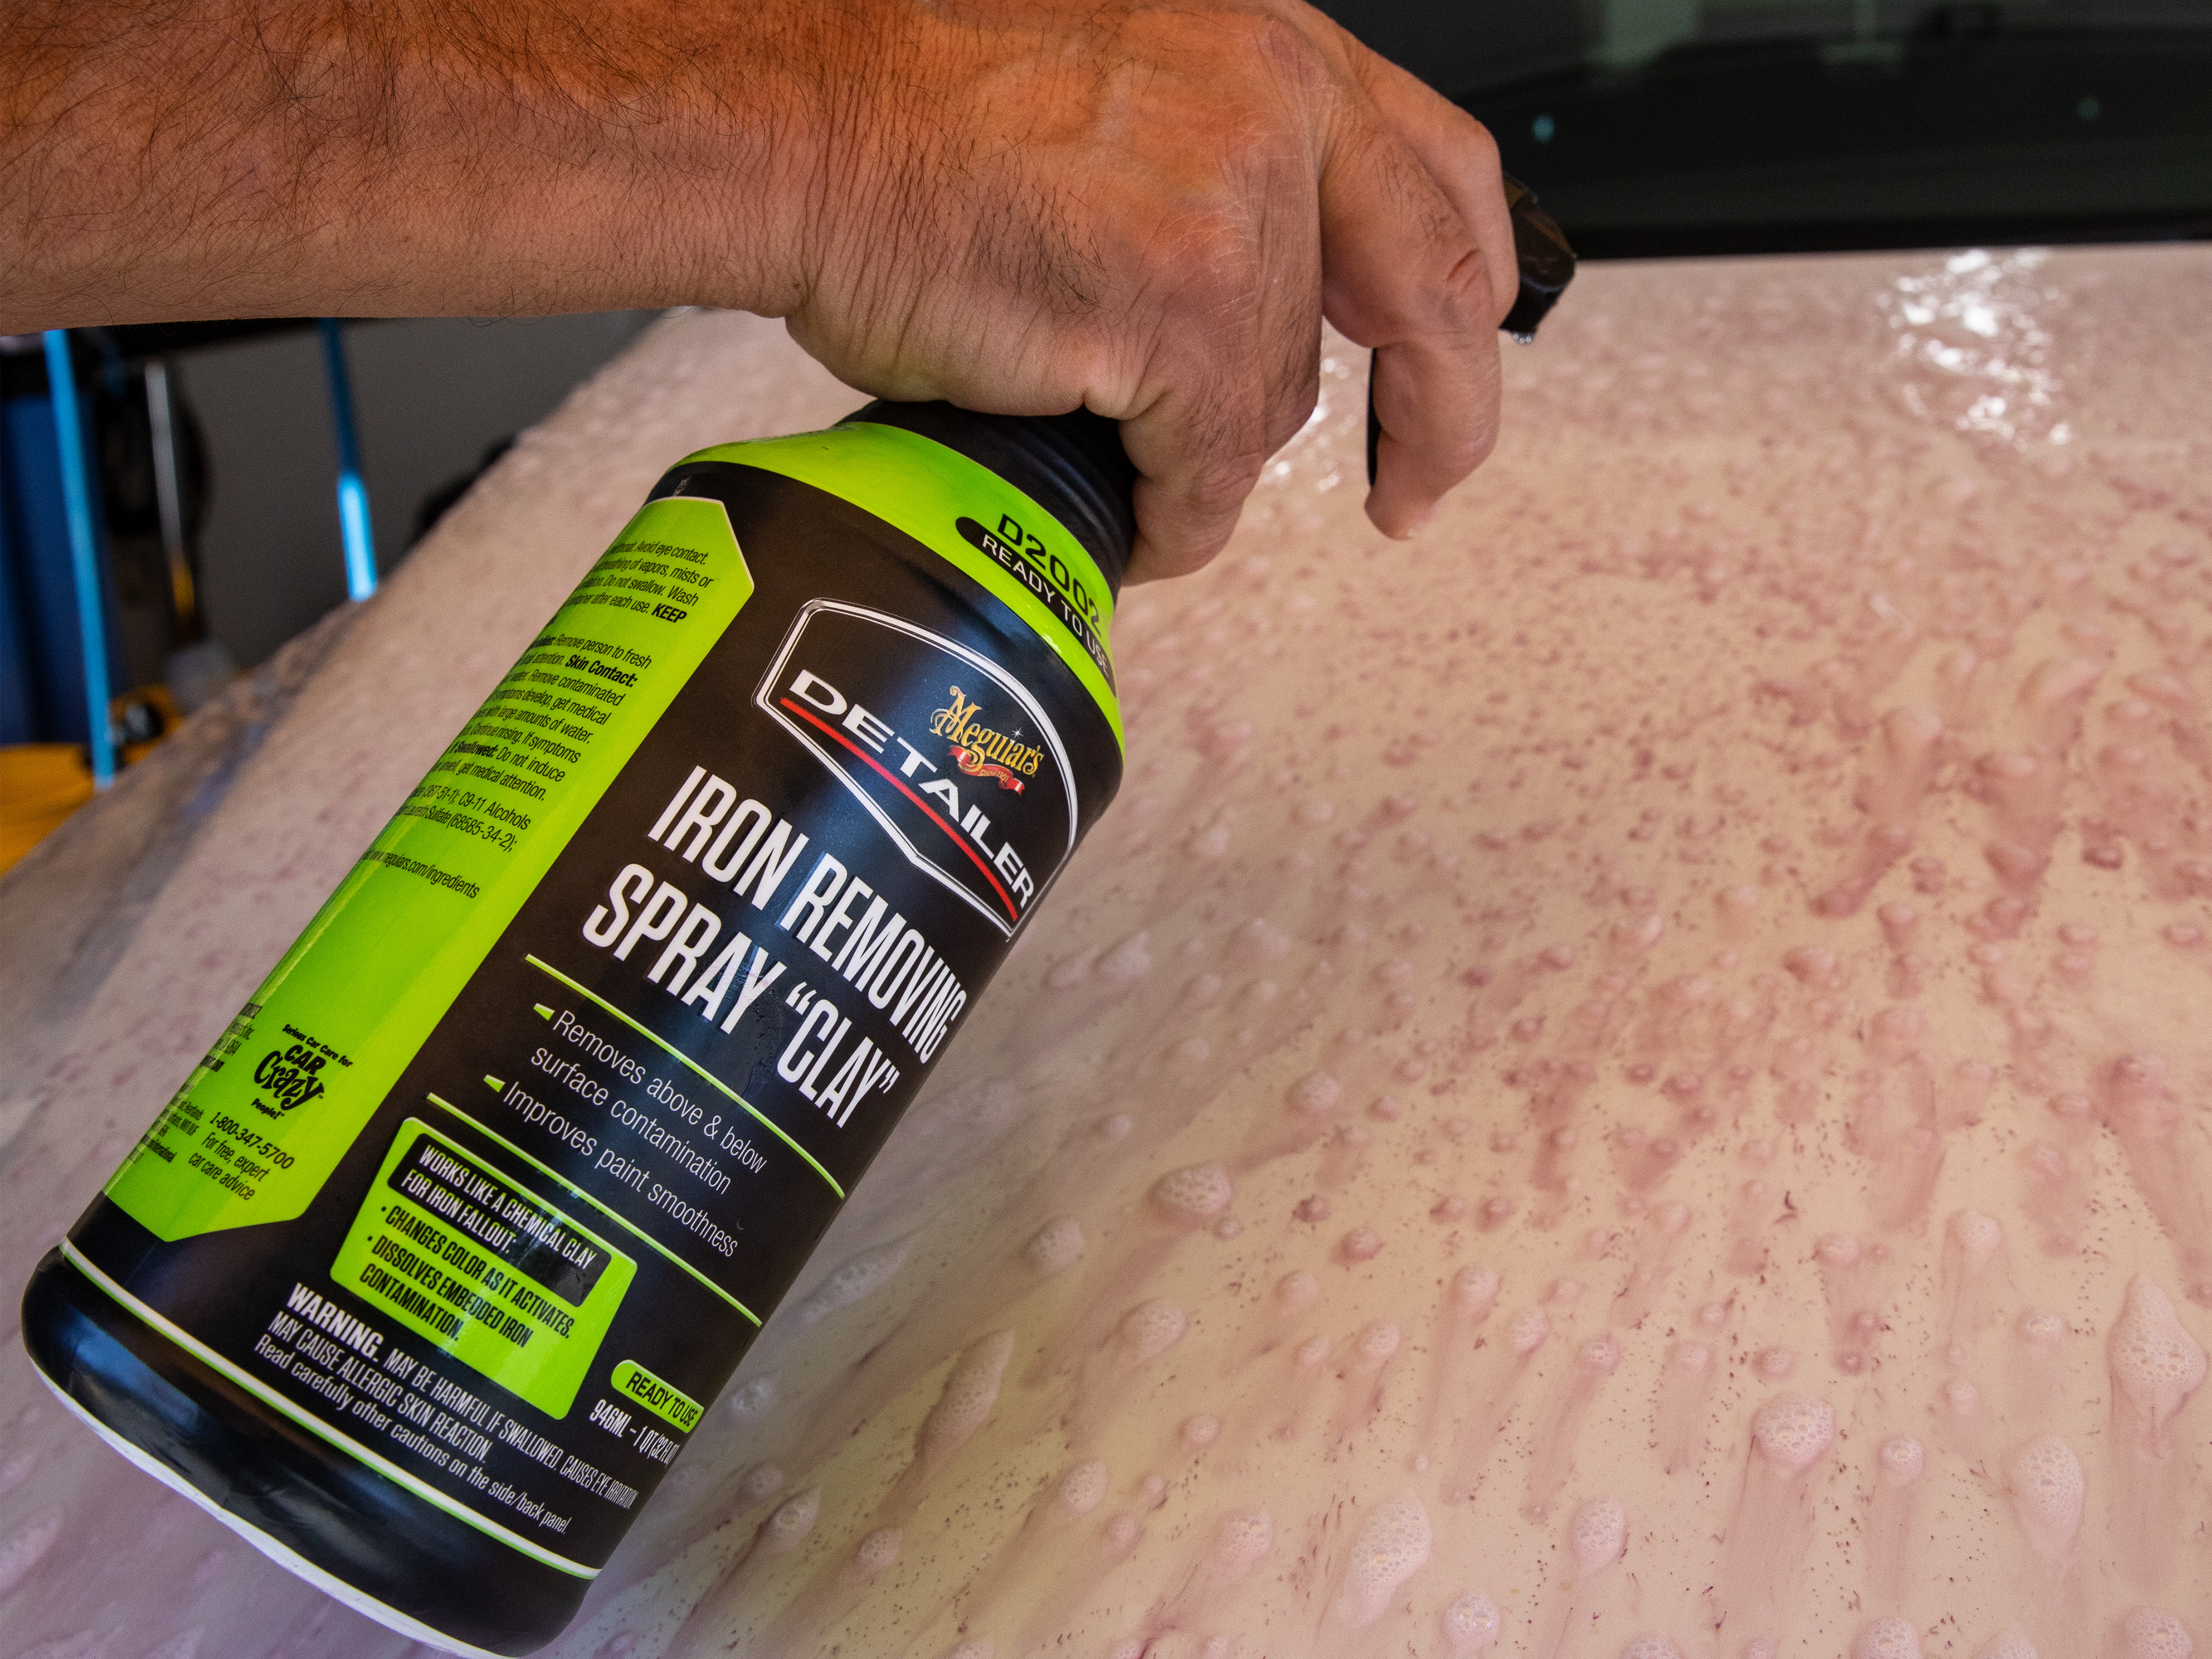 Meguiars Decontamination Car Wash Mud Cleaning Clay Strong to Sludge to Fly Paint Dust Volcanic Mud Beauty Car Wash Mud G1001EU Car Supplies